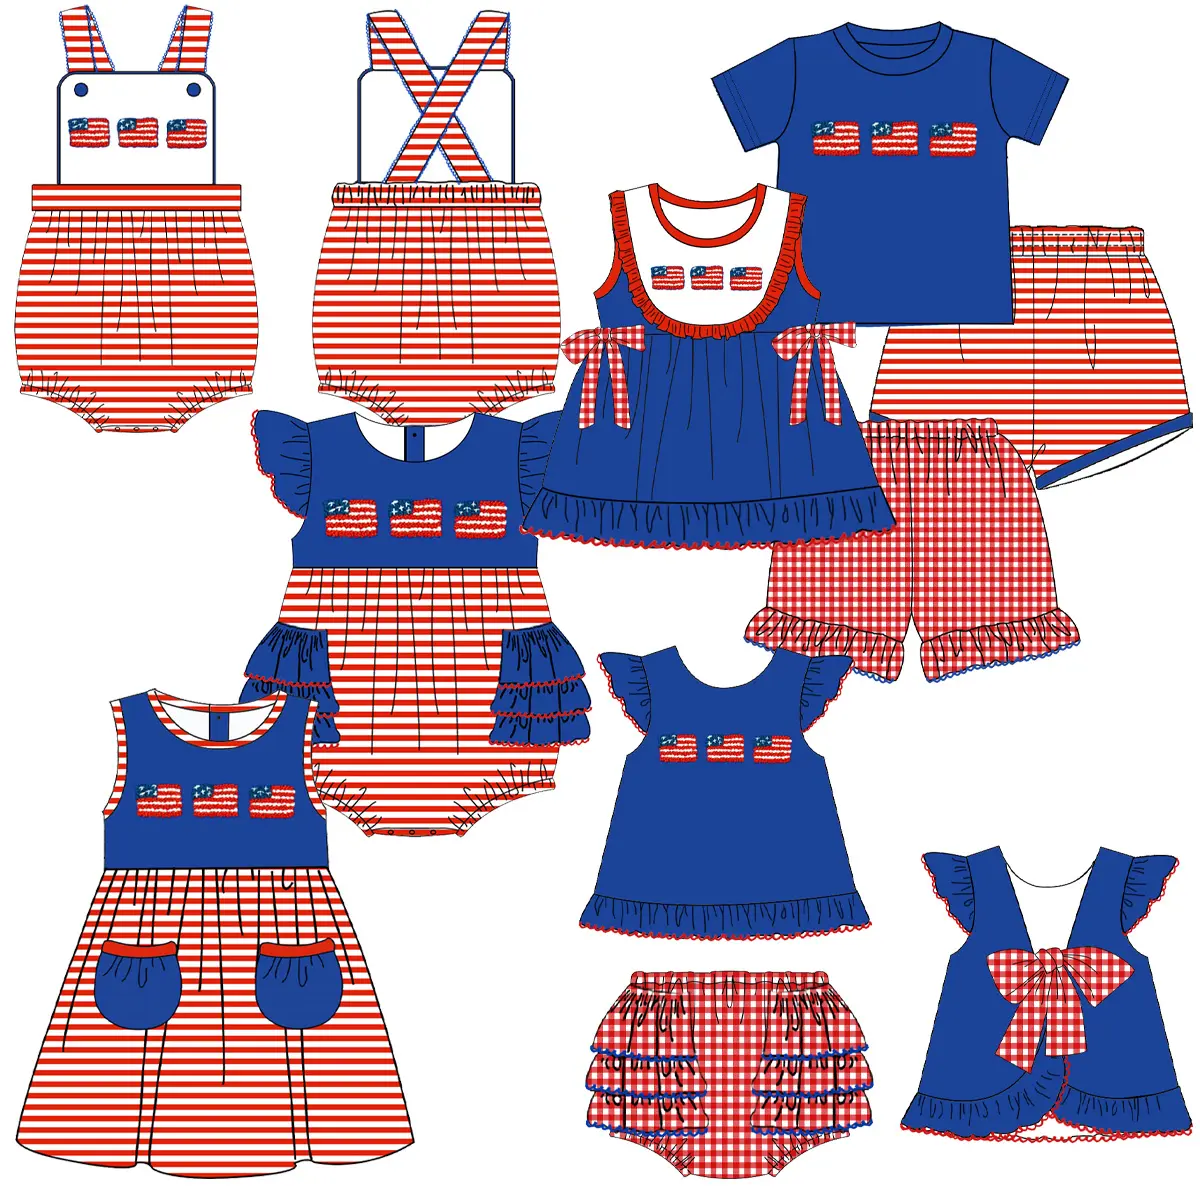 Wholesale little girl clothes flutter sleeve america flag French Knot July 4th girl outfits custom children clothing